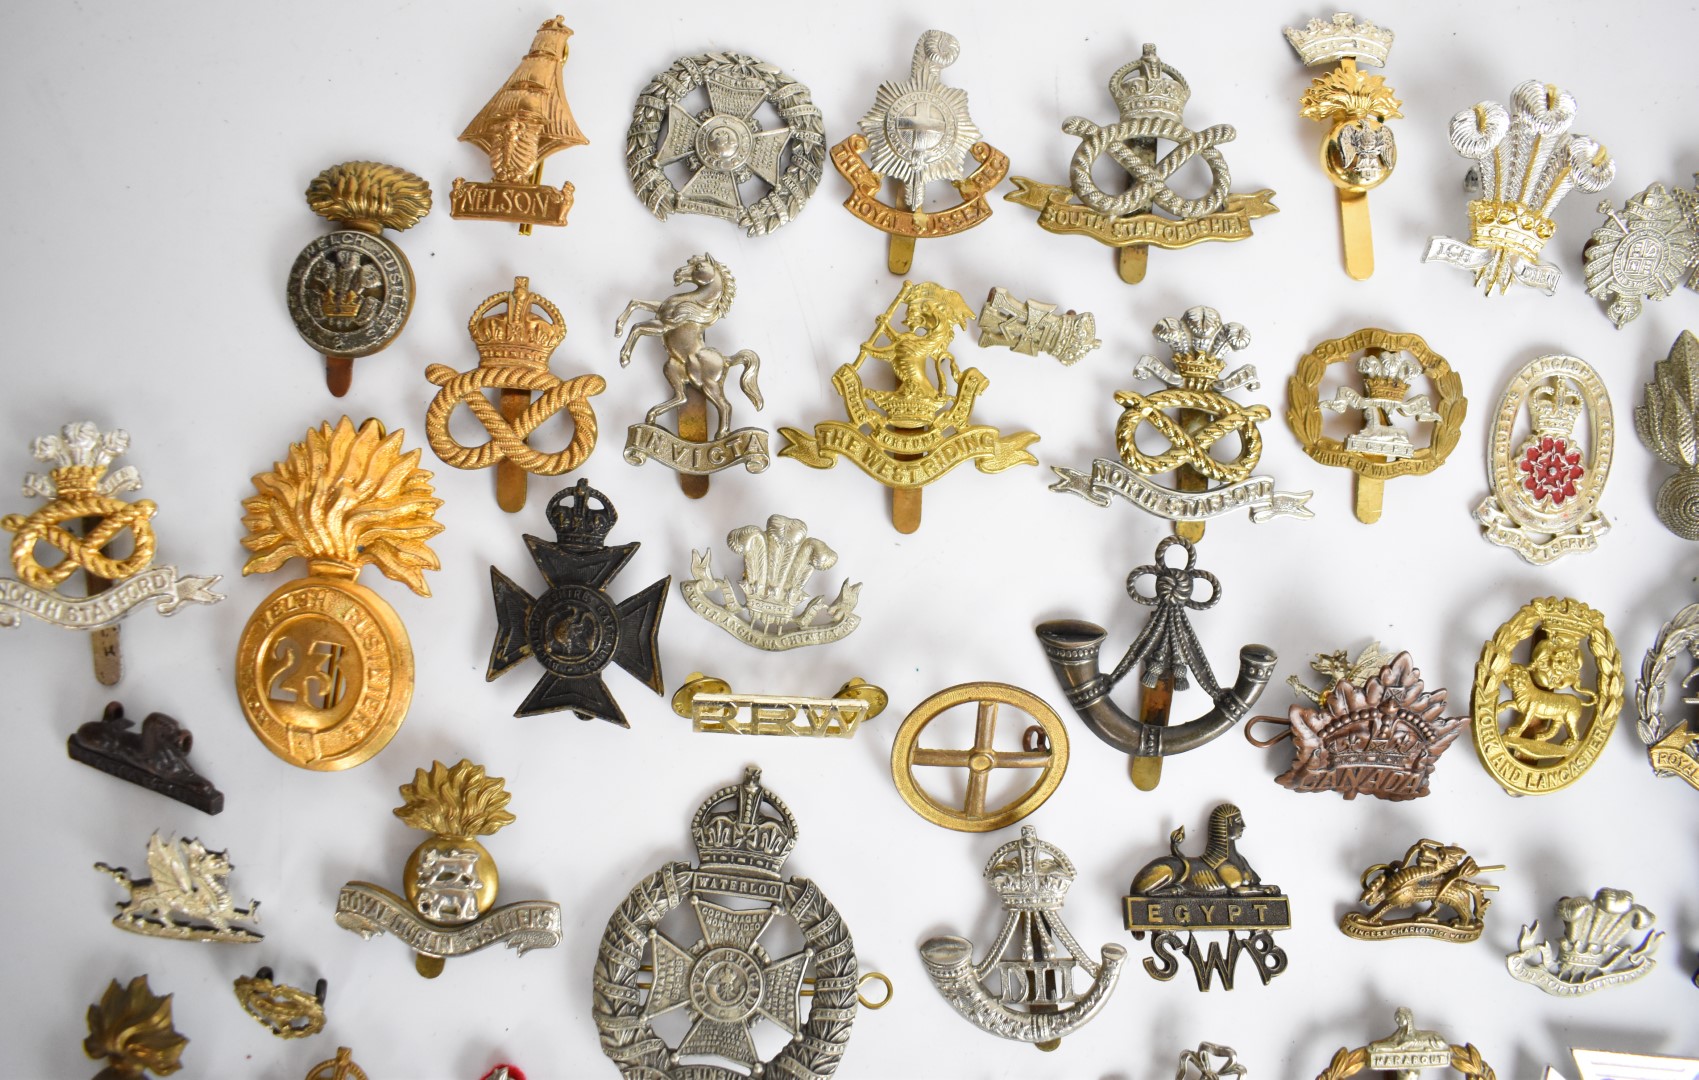 Large collection of approximately 100 British Army cap badges including Royal Sussex Regiment, - Image 13 of 14